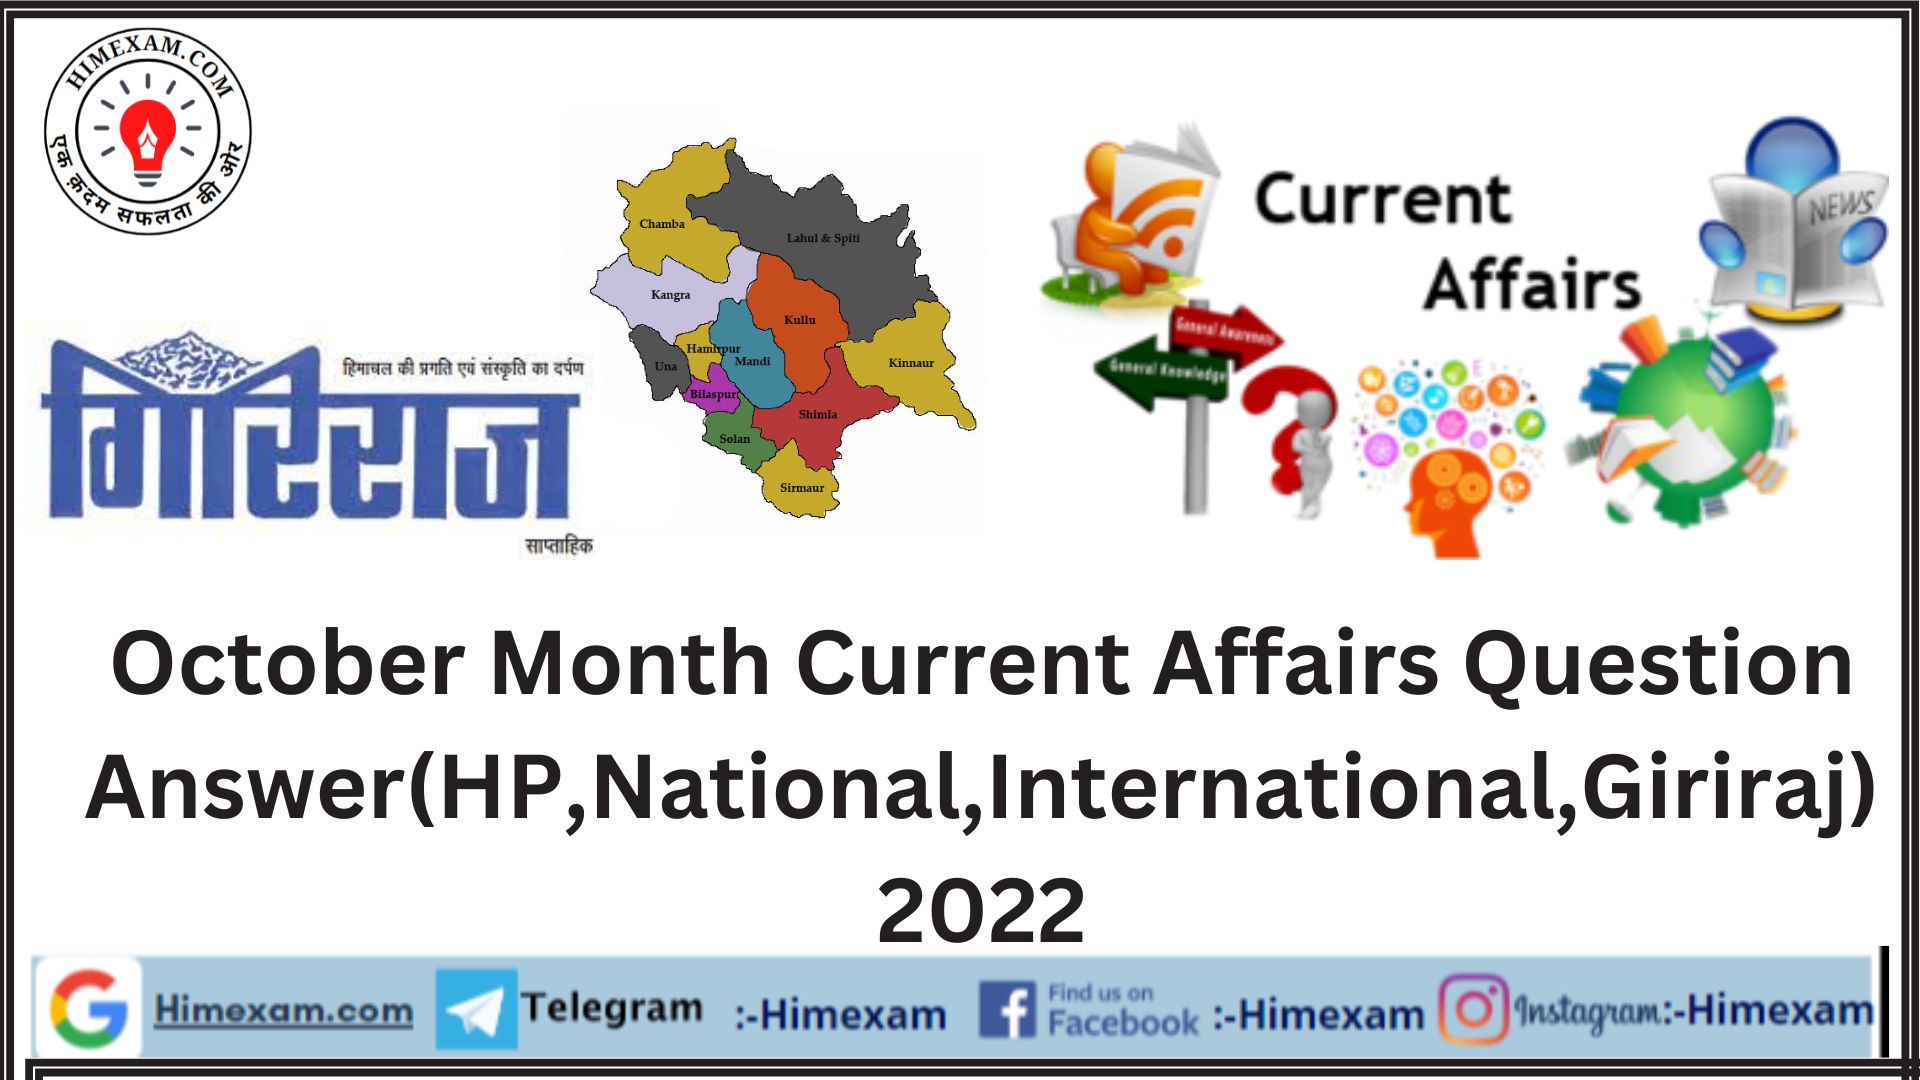 October Month Current Affairs Question Answer(HP,National,International,Giriraj) 2022